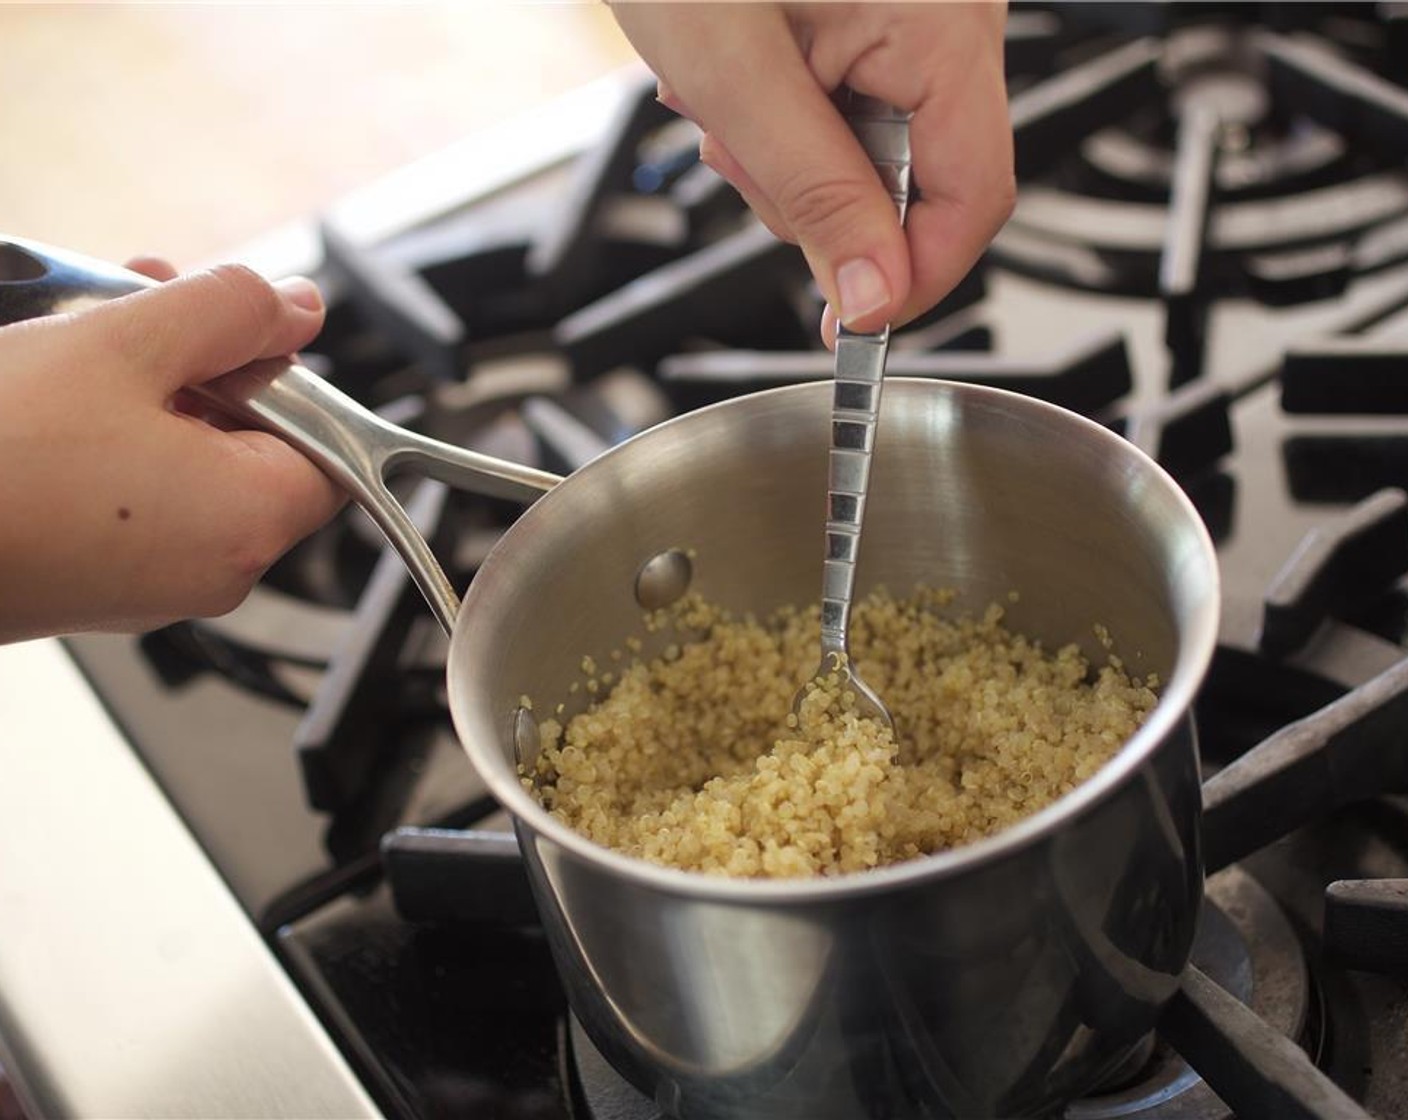 step 1 Combine the Quinoa (2/3 cup) with one cup of water and Salt (1/4 tsp) in a small saucepan over high heat. Bring to a boil. Reduce heat to a simmer, cover, and cook for 20 minutes.